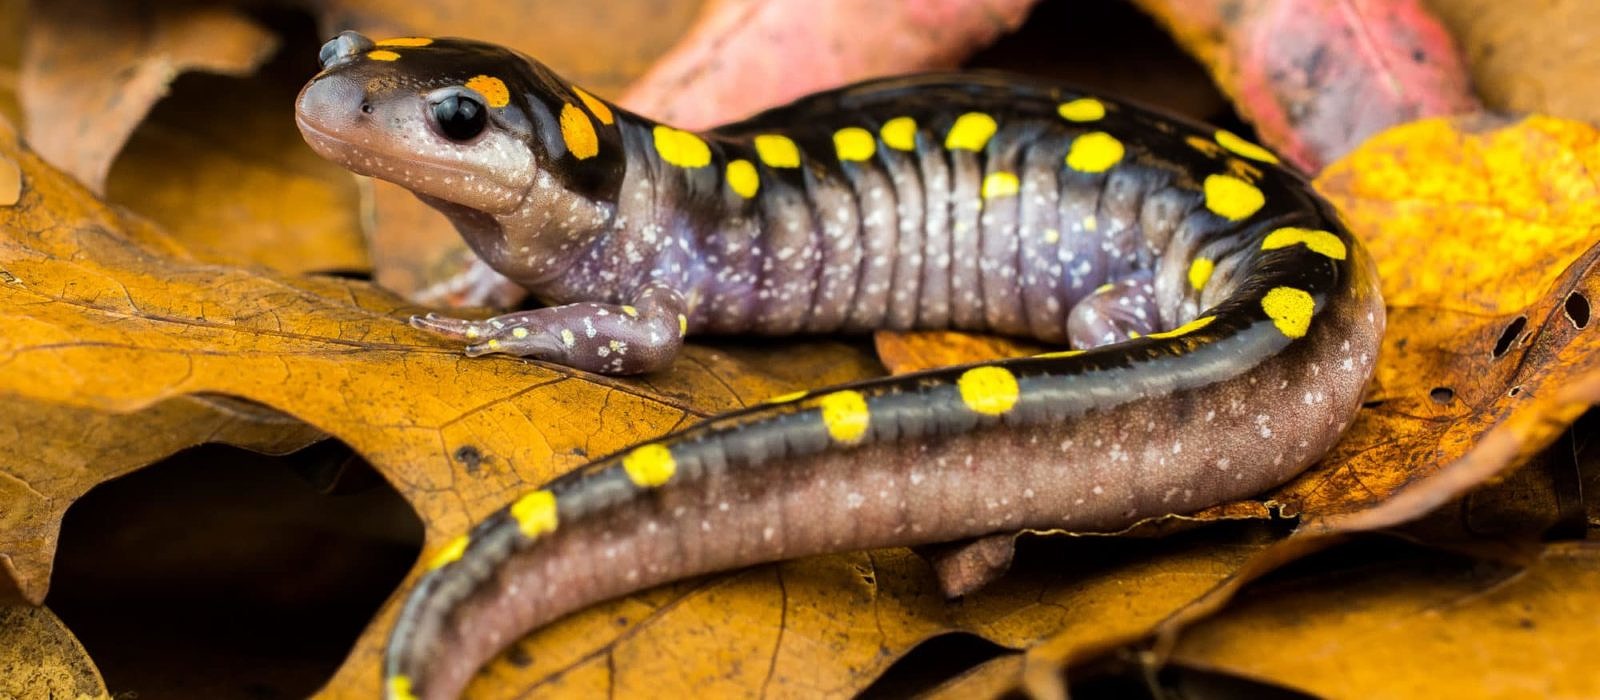 A gorgeous spotted salamander, with goldrenrod spots, rests on the leaf litter. (photo © John Clare)